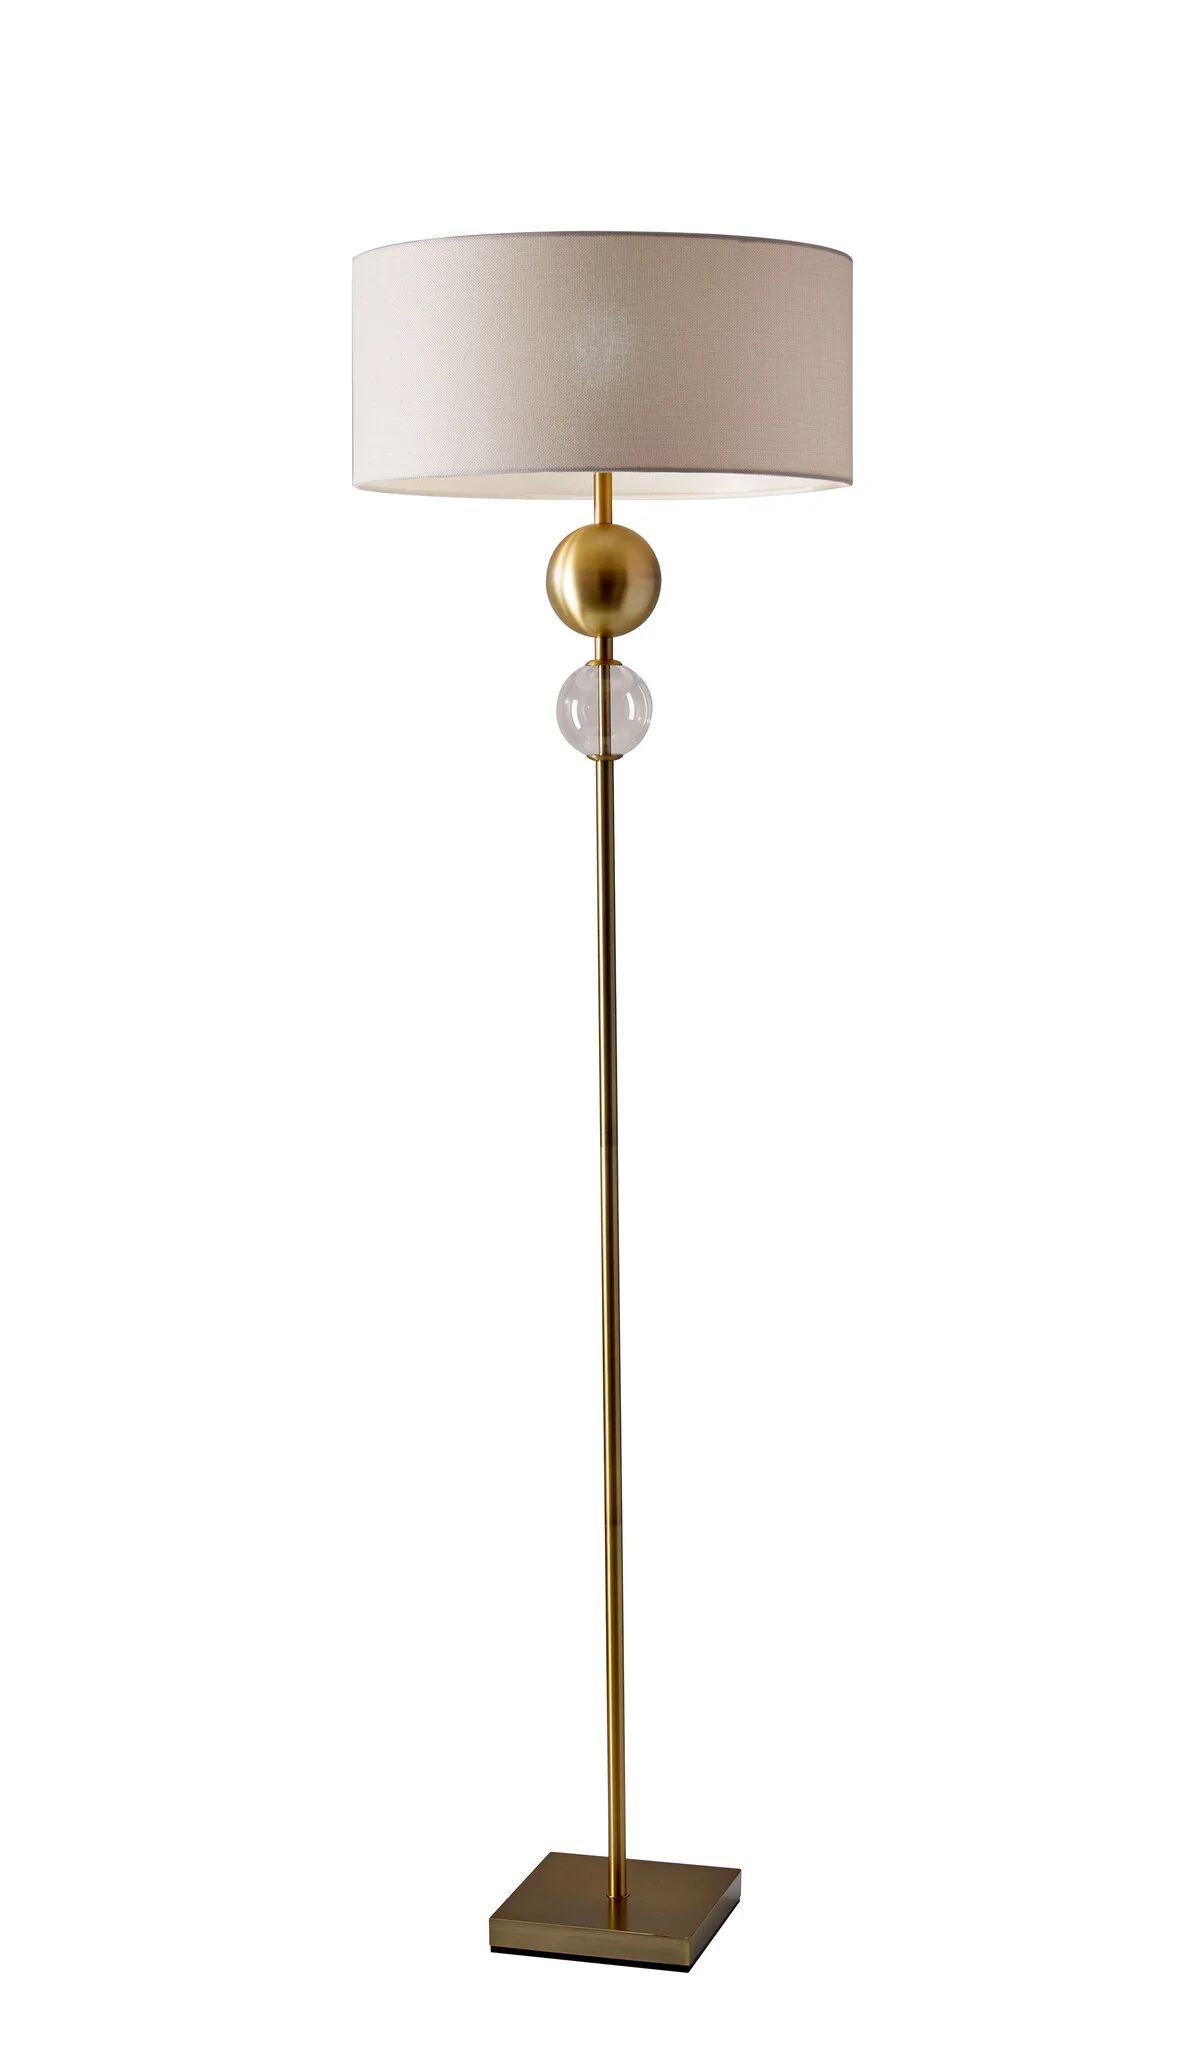 69" Brass Steel and Glass Floor Lamp With Off White Fabric Drum Shade